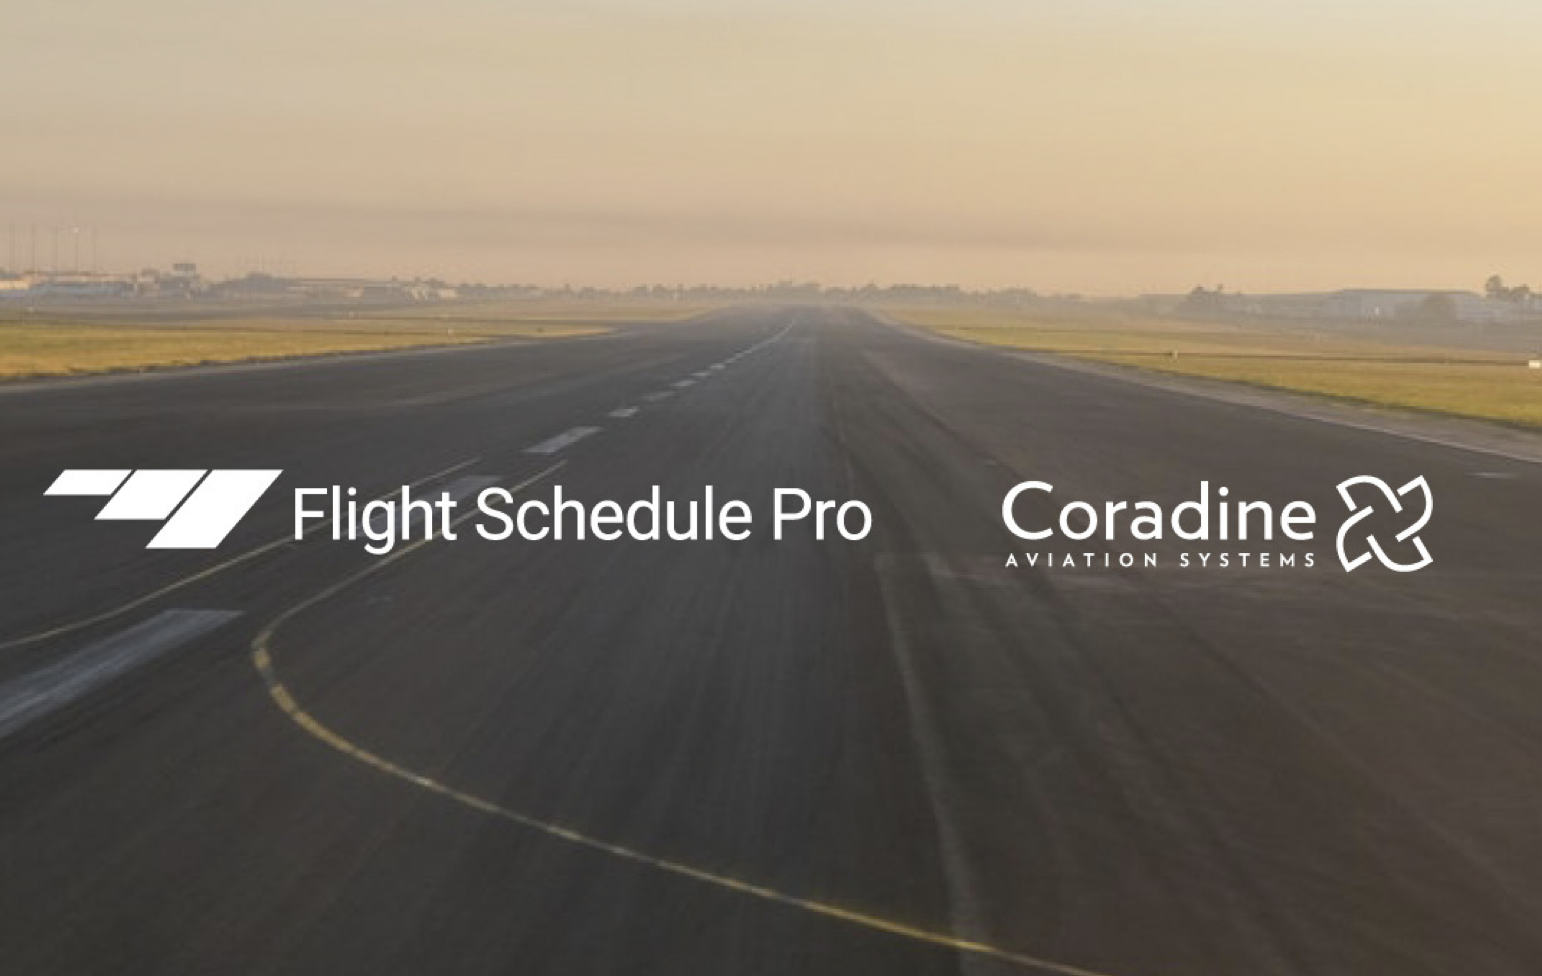 Exciting News: Flight Schedule Pro Acquires Coradine, Developer of the LogTen Electronic Pilot Logbook